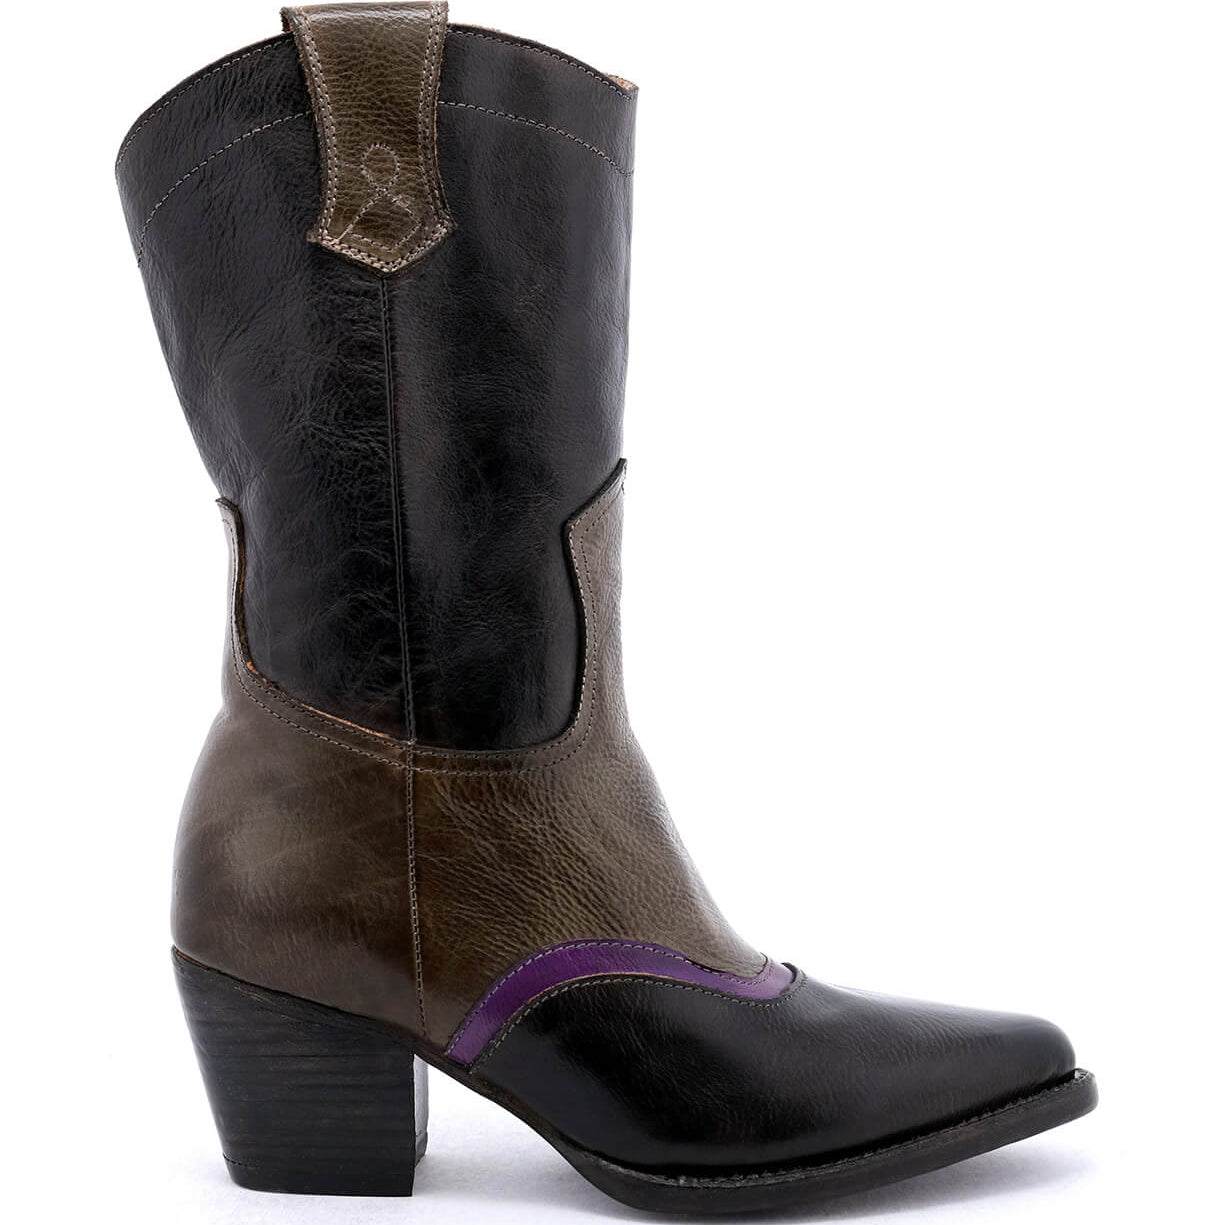 An Oak Tree Farms Basanti women's black and purple leather cowboy boot with a pointed toe on a white background.